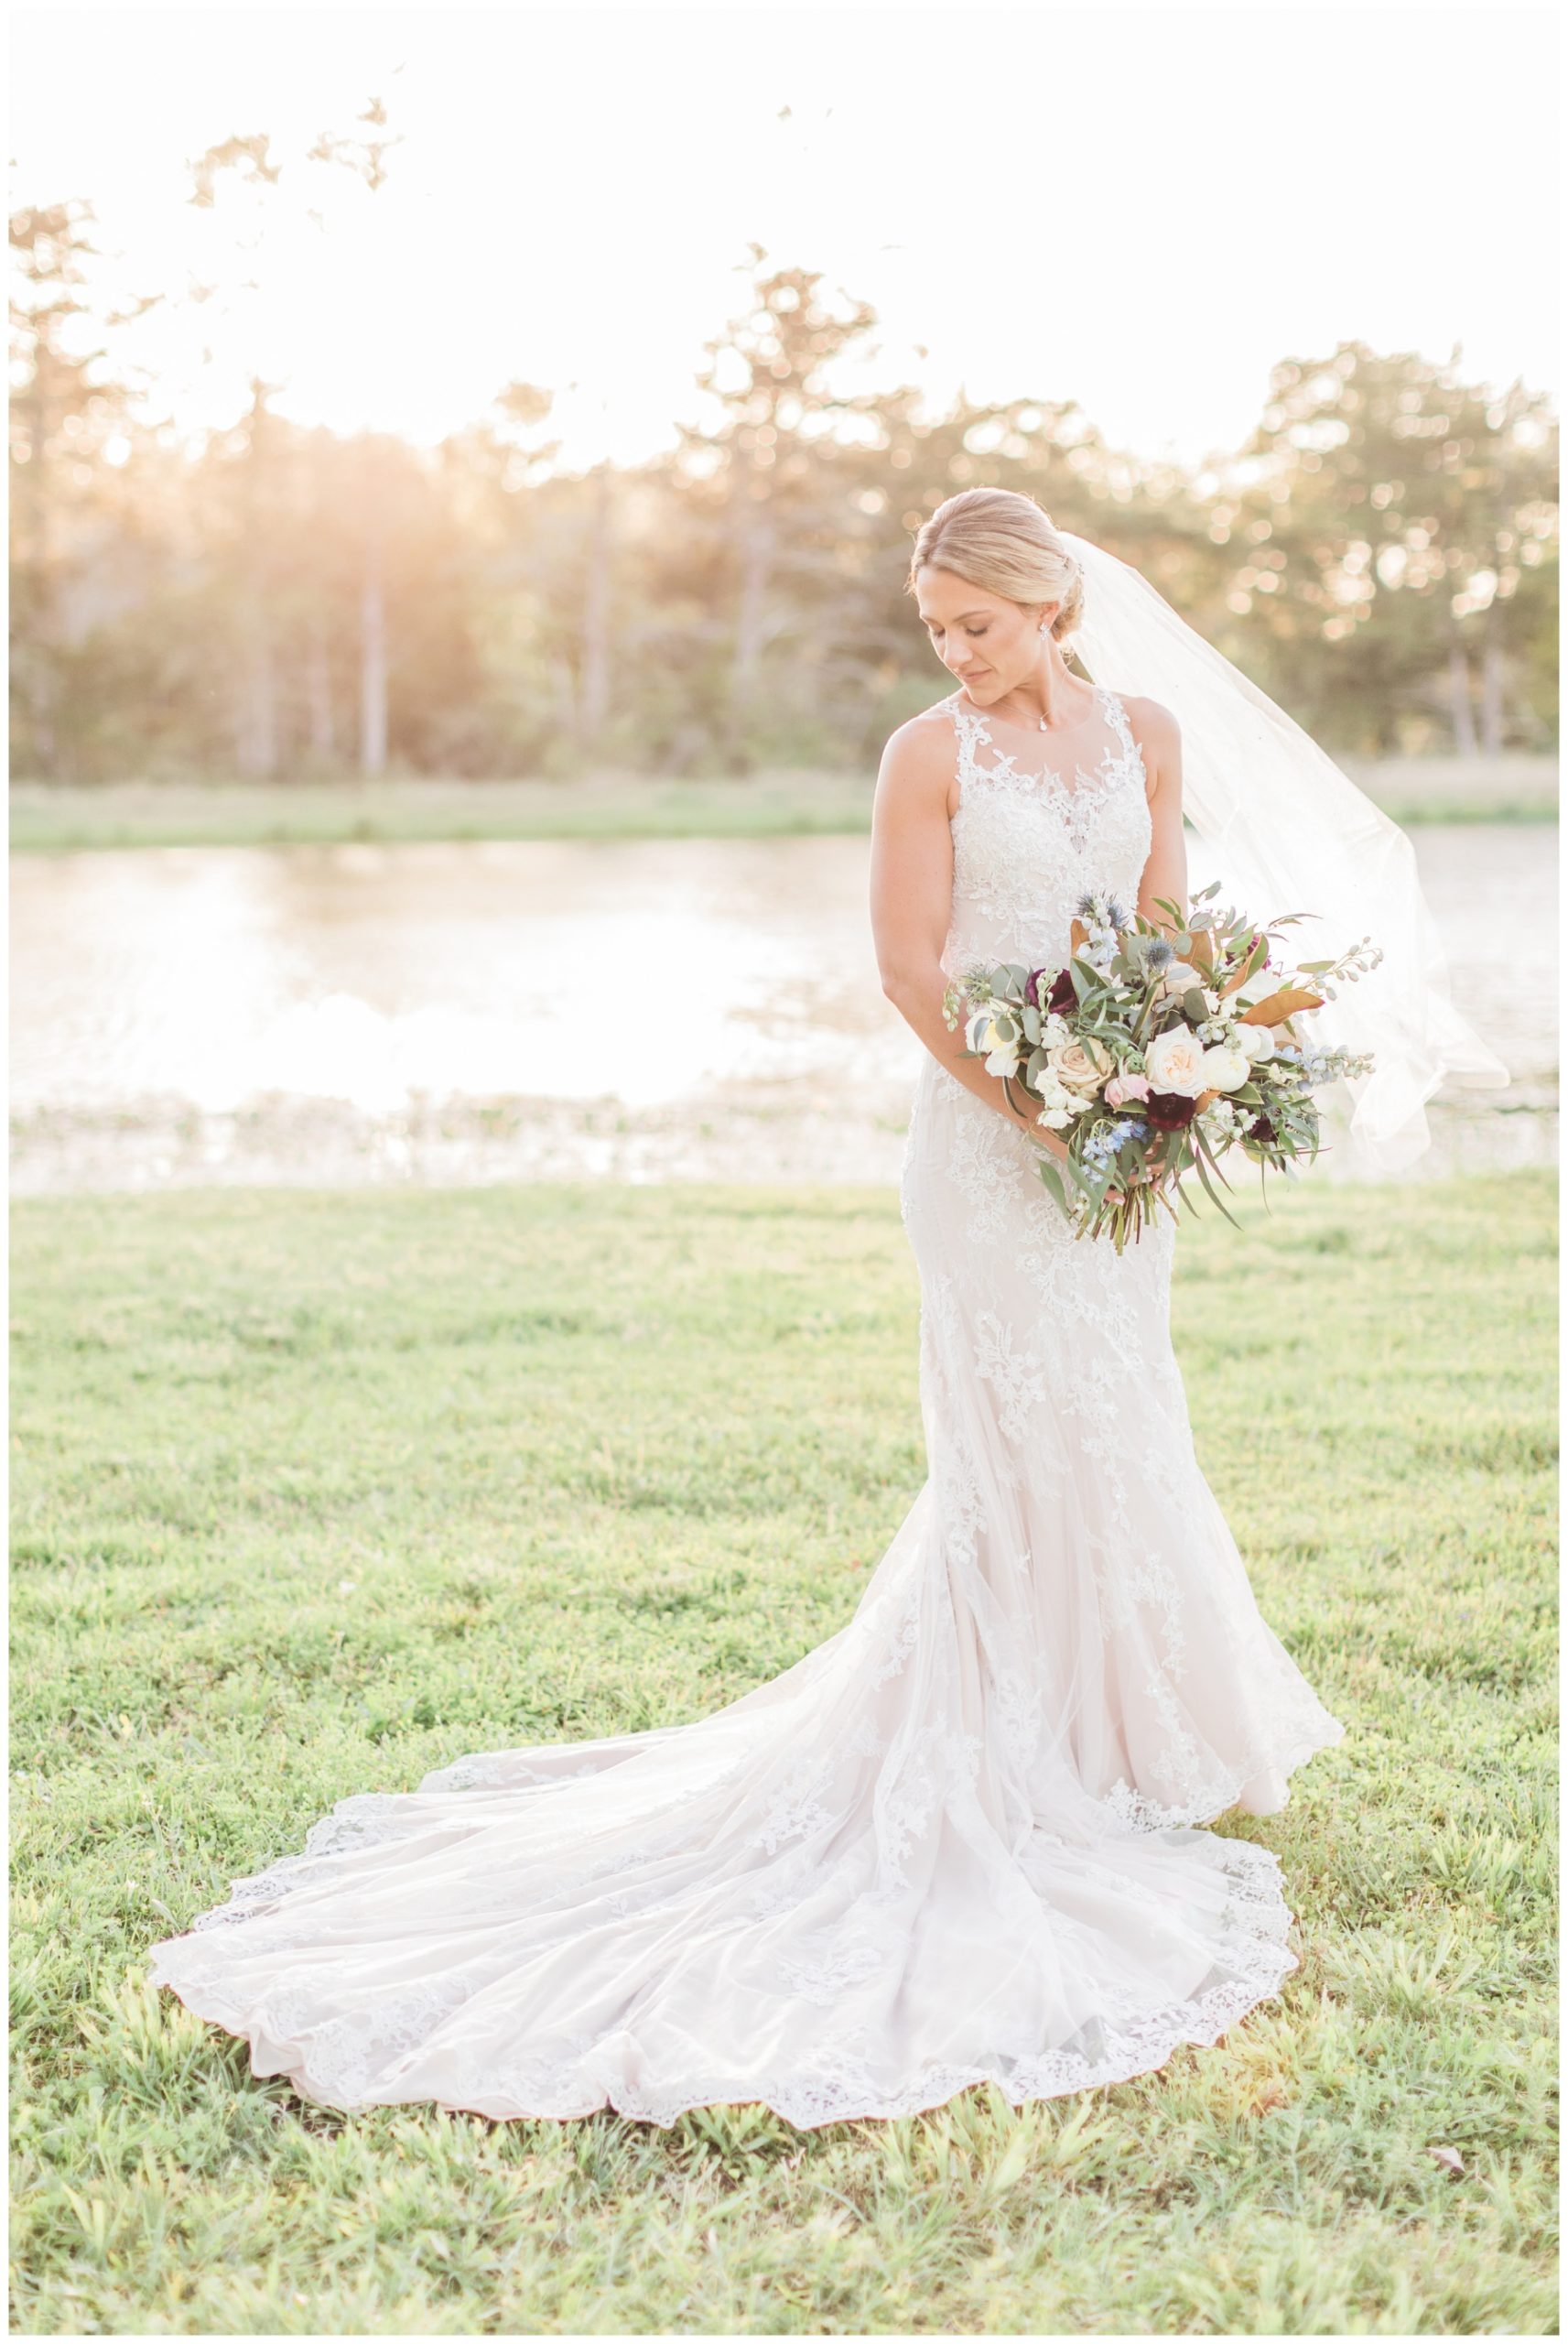 Bride in a lace wedding gown with a sweetheart neckline and chapel train